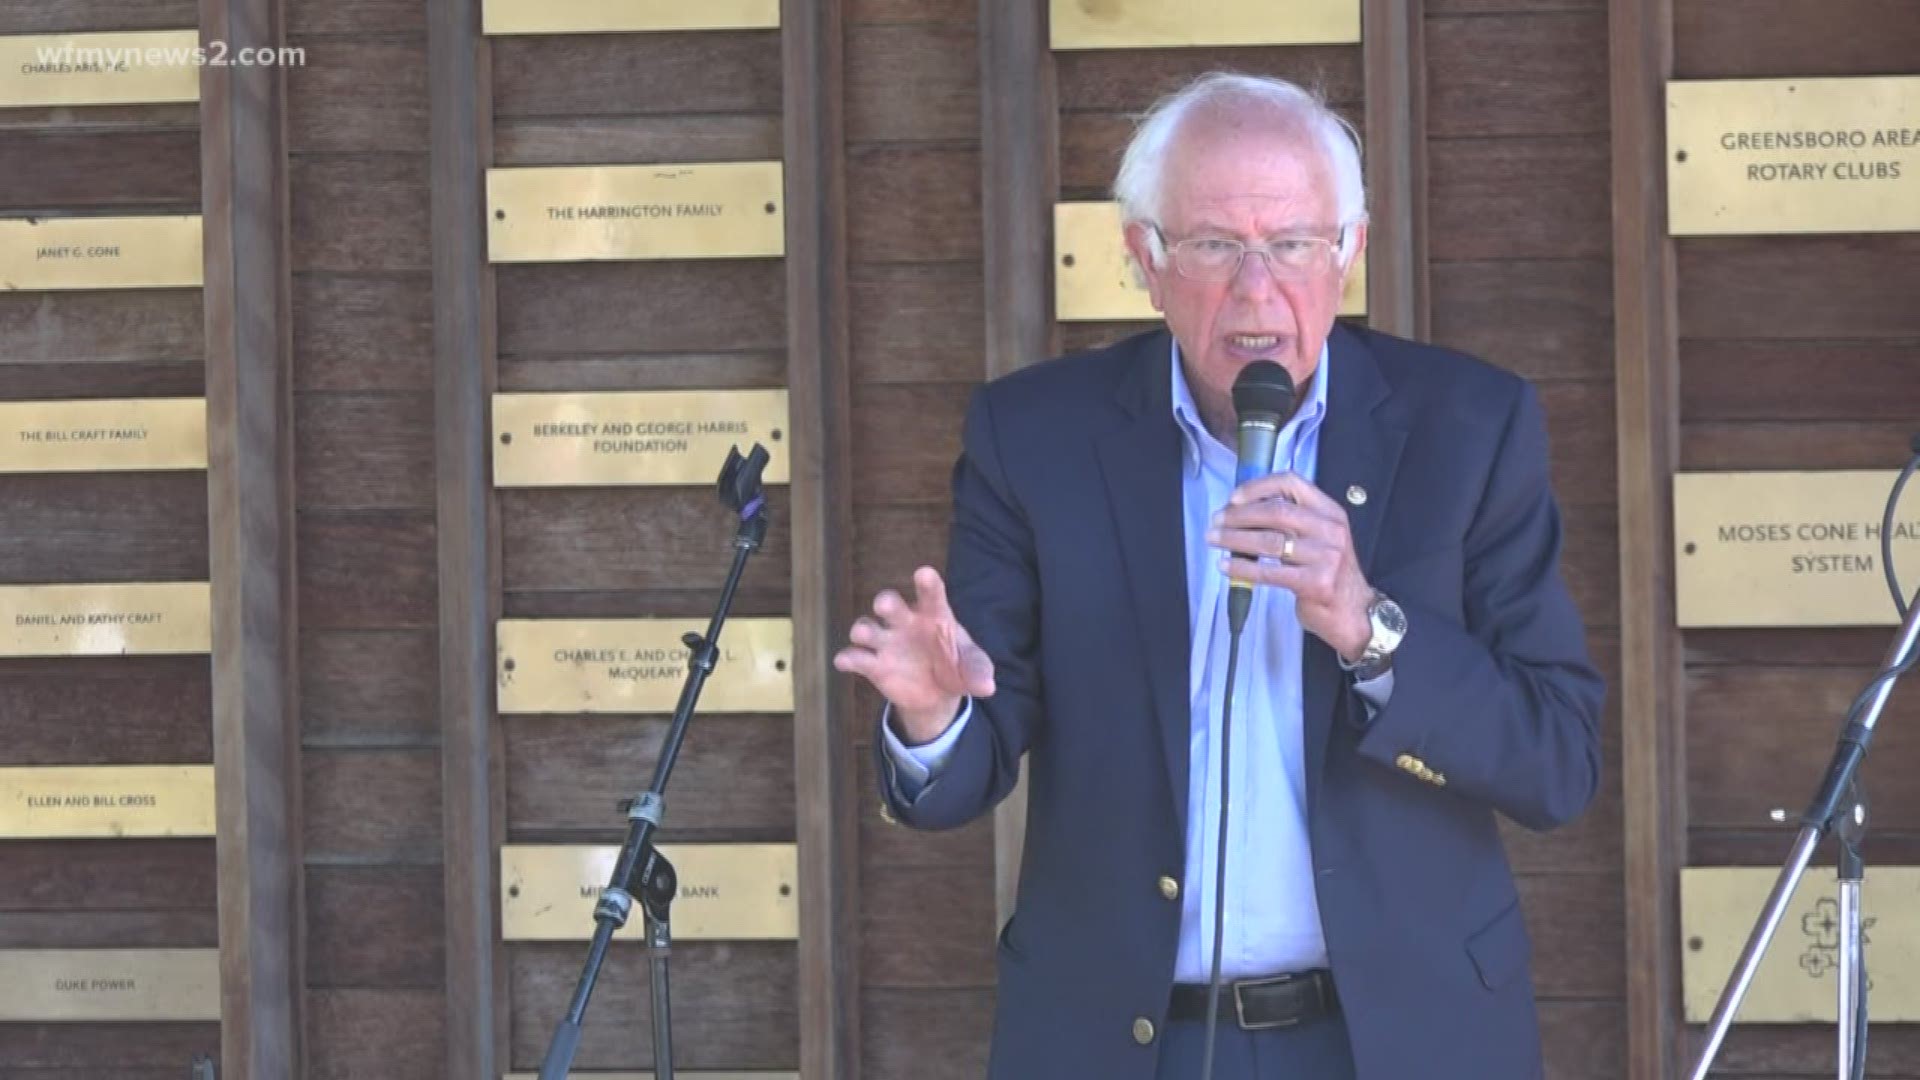 Democratic candidate Bernie Sanders spoke at Bennet College, but what does he plan to do with the environment.